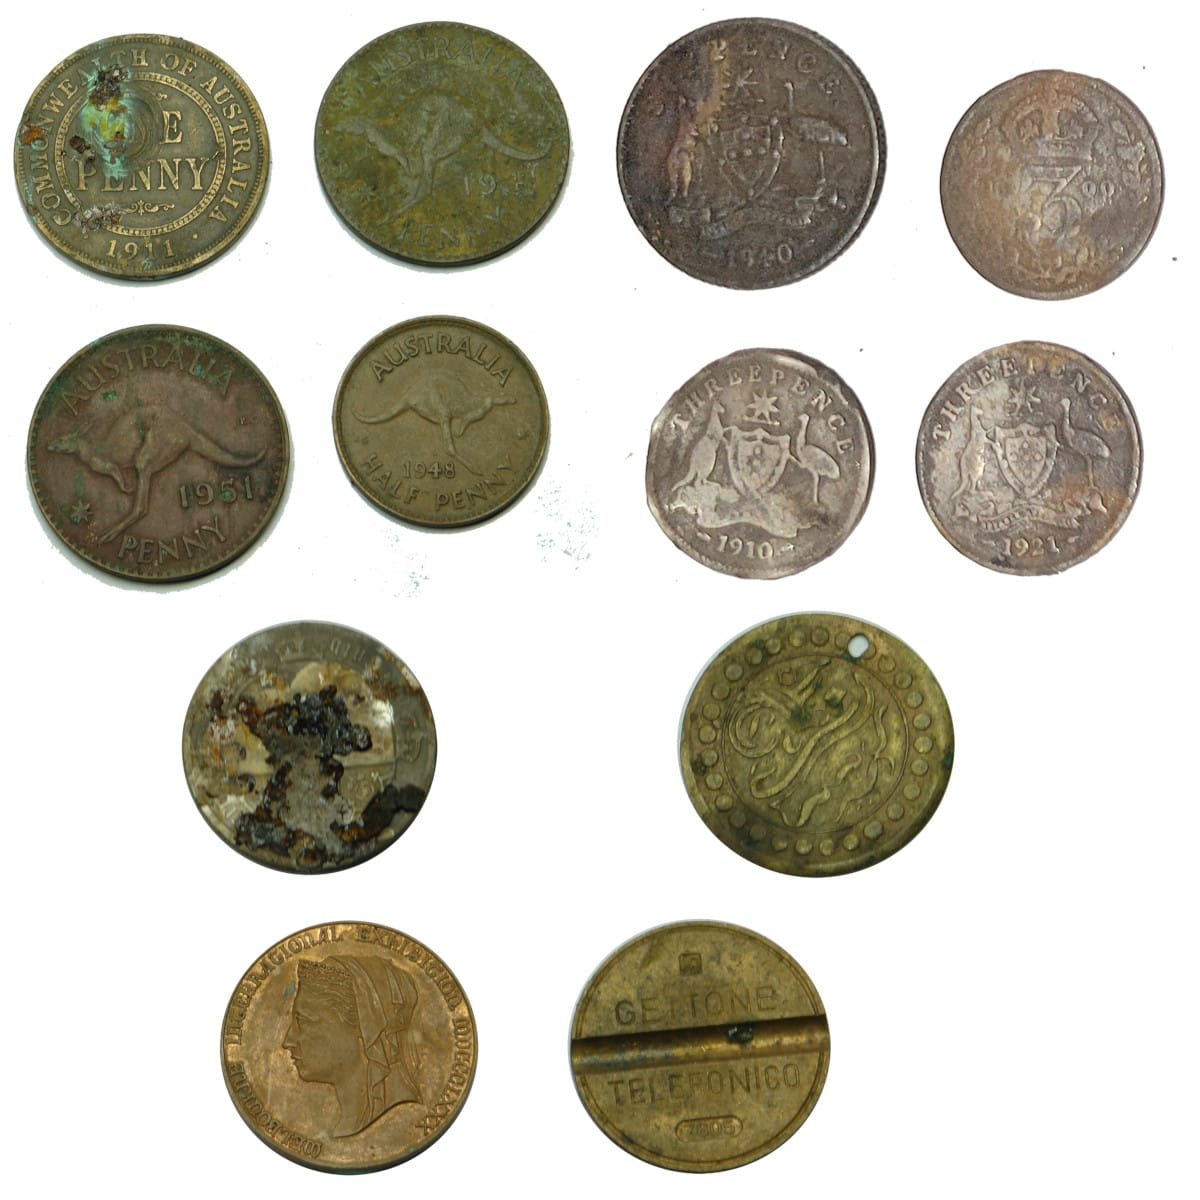 12 Numismatic items: 9 Coins; Medallion; Thin copper disc and a Gettone Phone token.